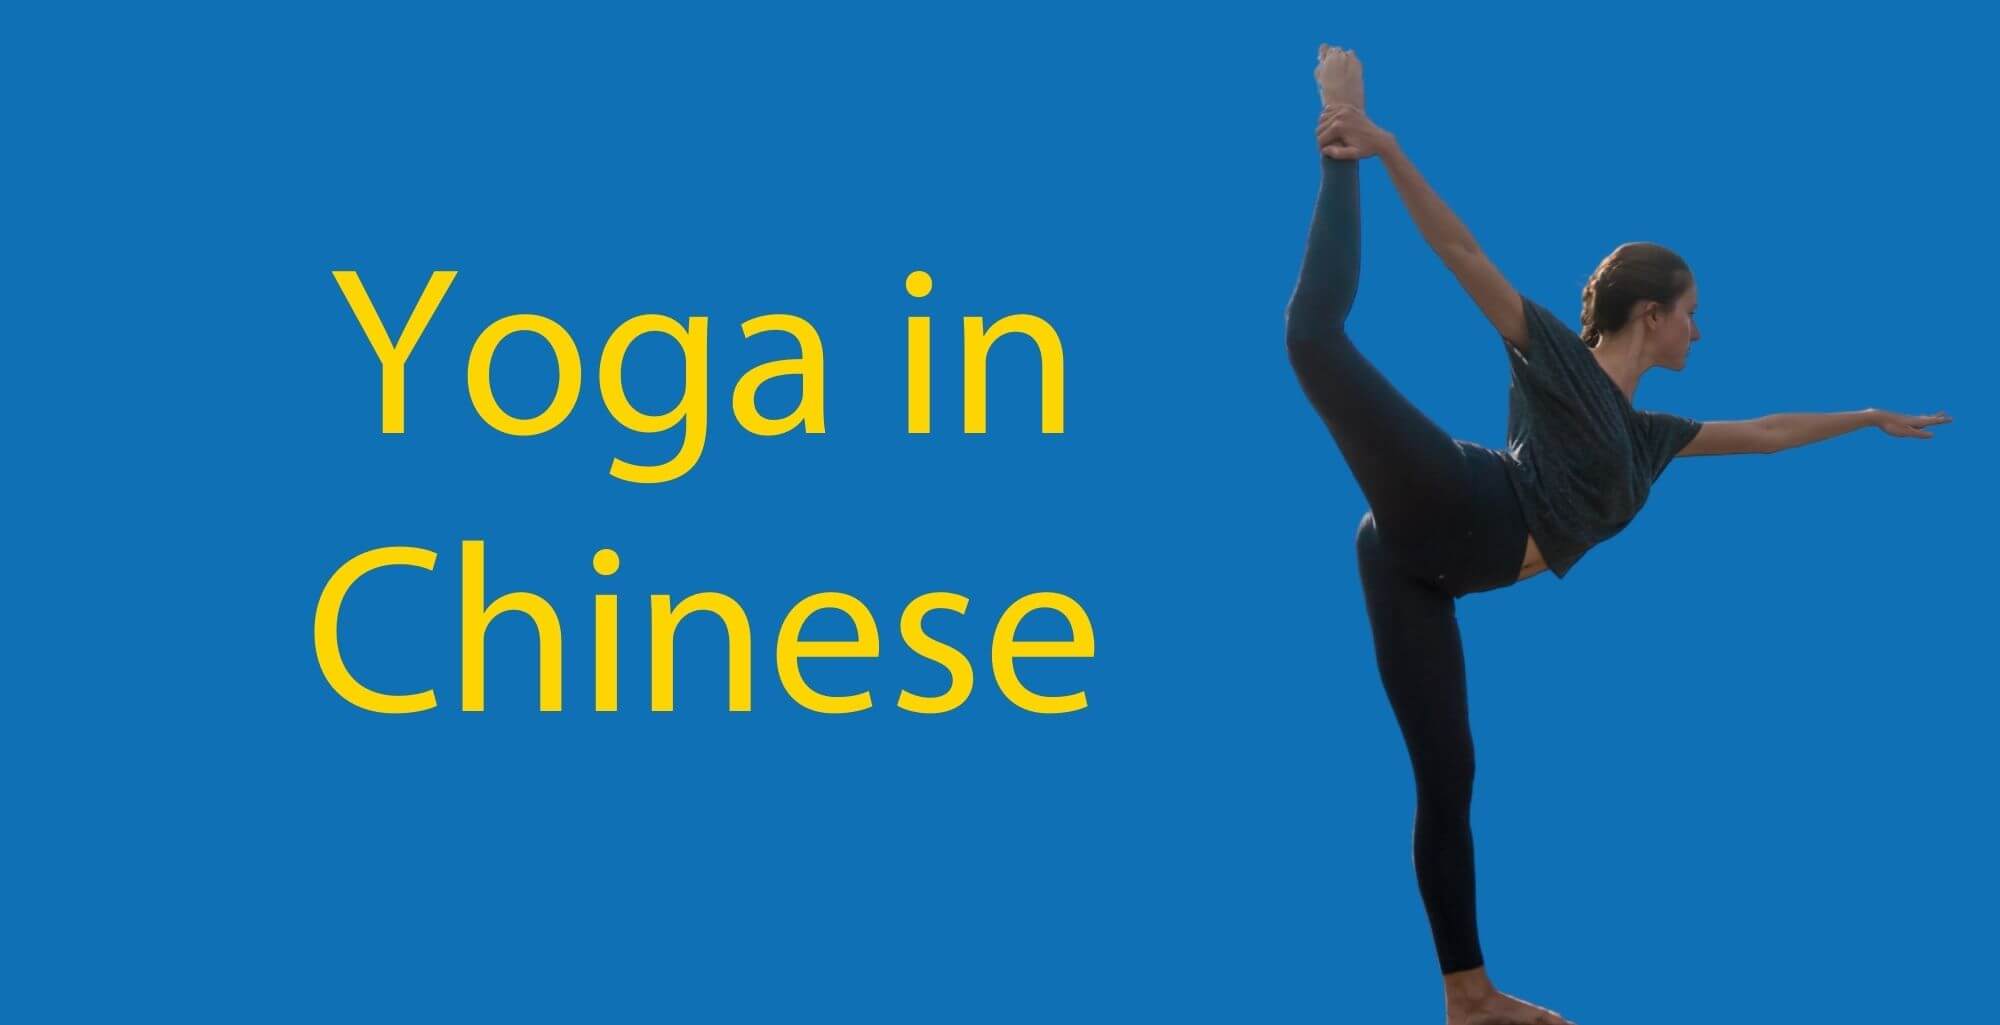 Yoga poses as Olympic sport: Is that a stretch? | PDF